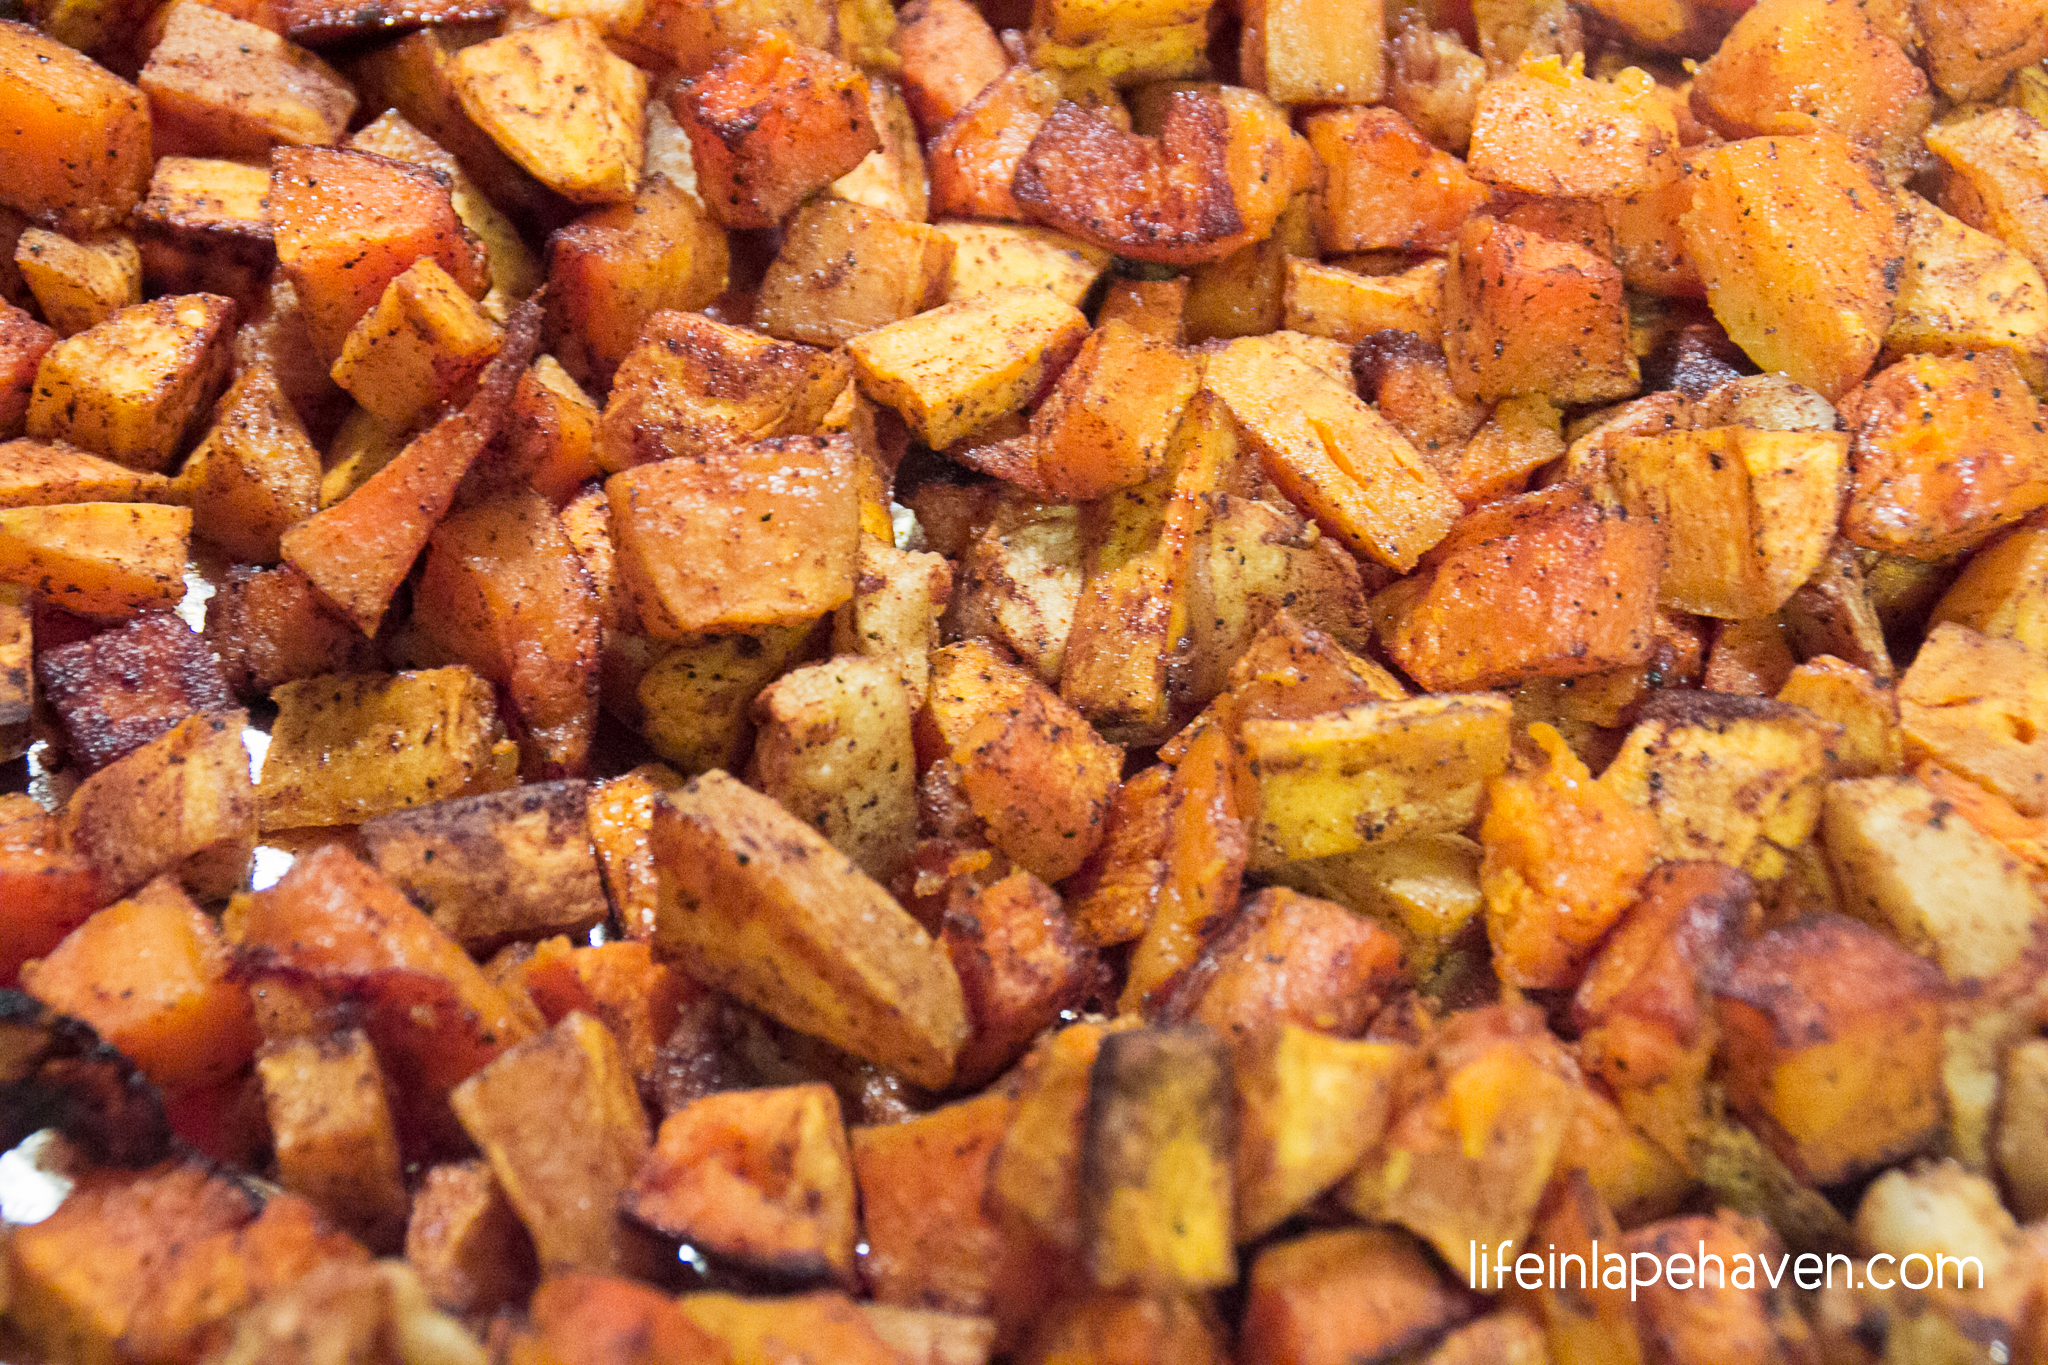 Life in Lape Haven: Tried It Tuesday: Roasted Cinnamon-Spiced Butternut Squash with Sweet Potatoes & Apples. This delicious roasted butternut squash side dish spiced with cinnamon and sweetened with sweet potatoes and apples is a great healthy addition to any meal or holiday table throughout the fall and winter.